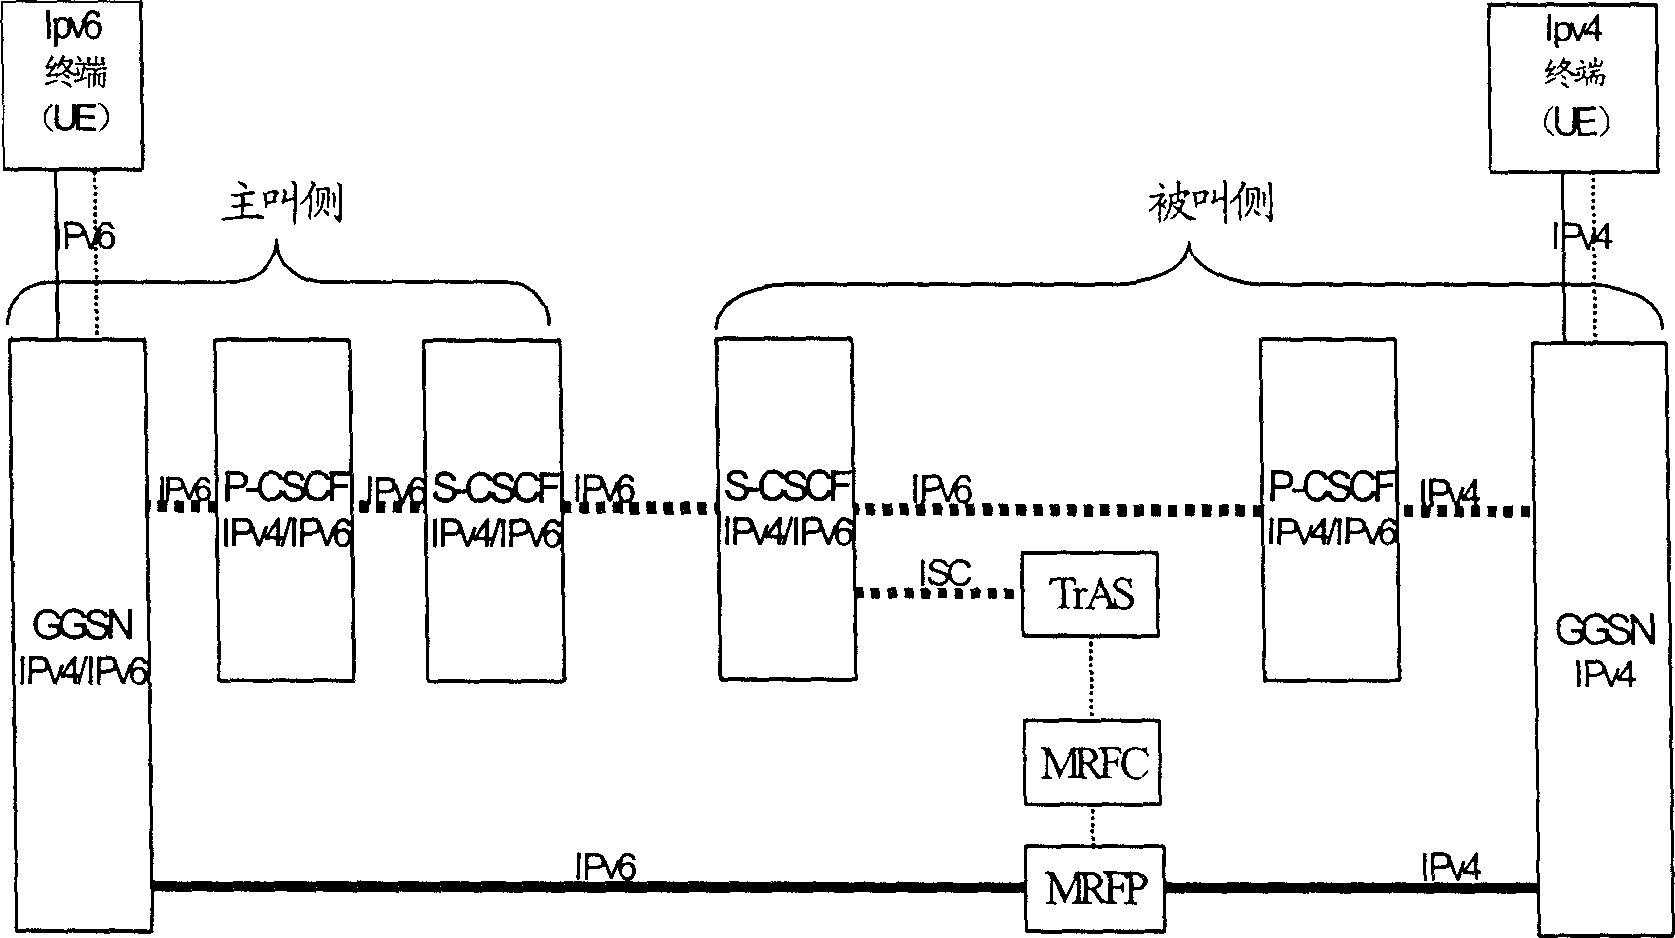 Method of communicating between different protocal of terminal user interface of IP multimedia subsystem